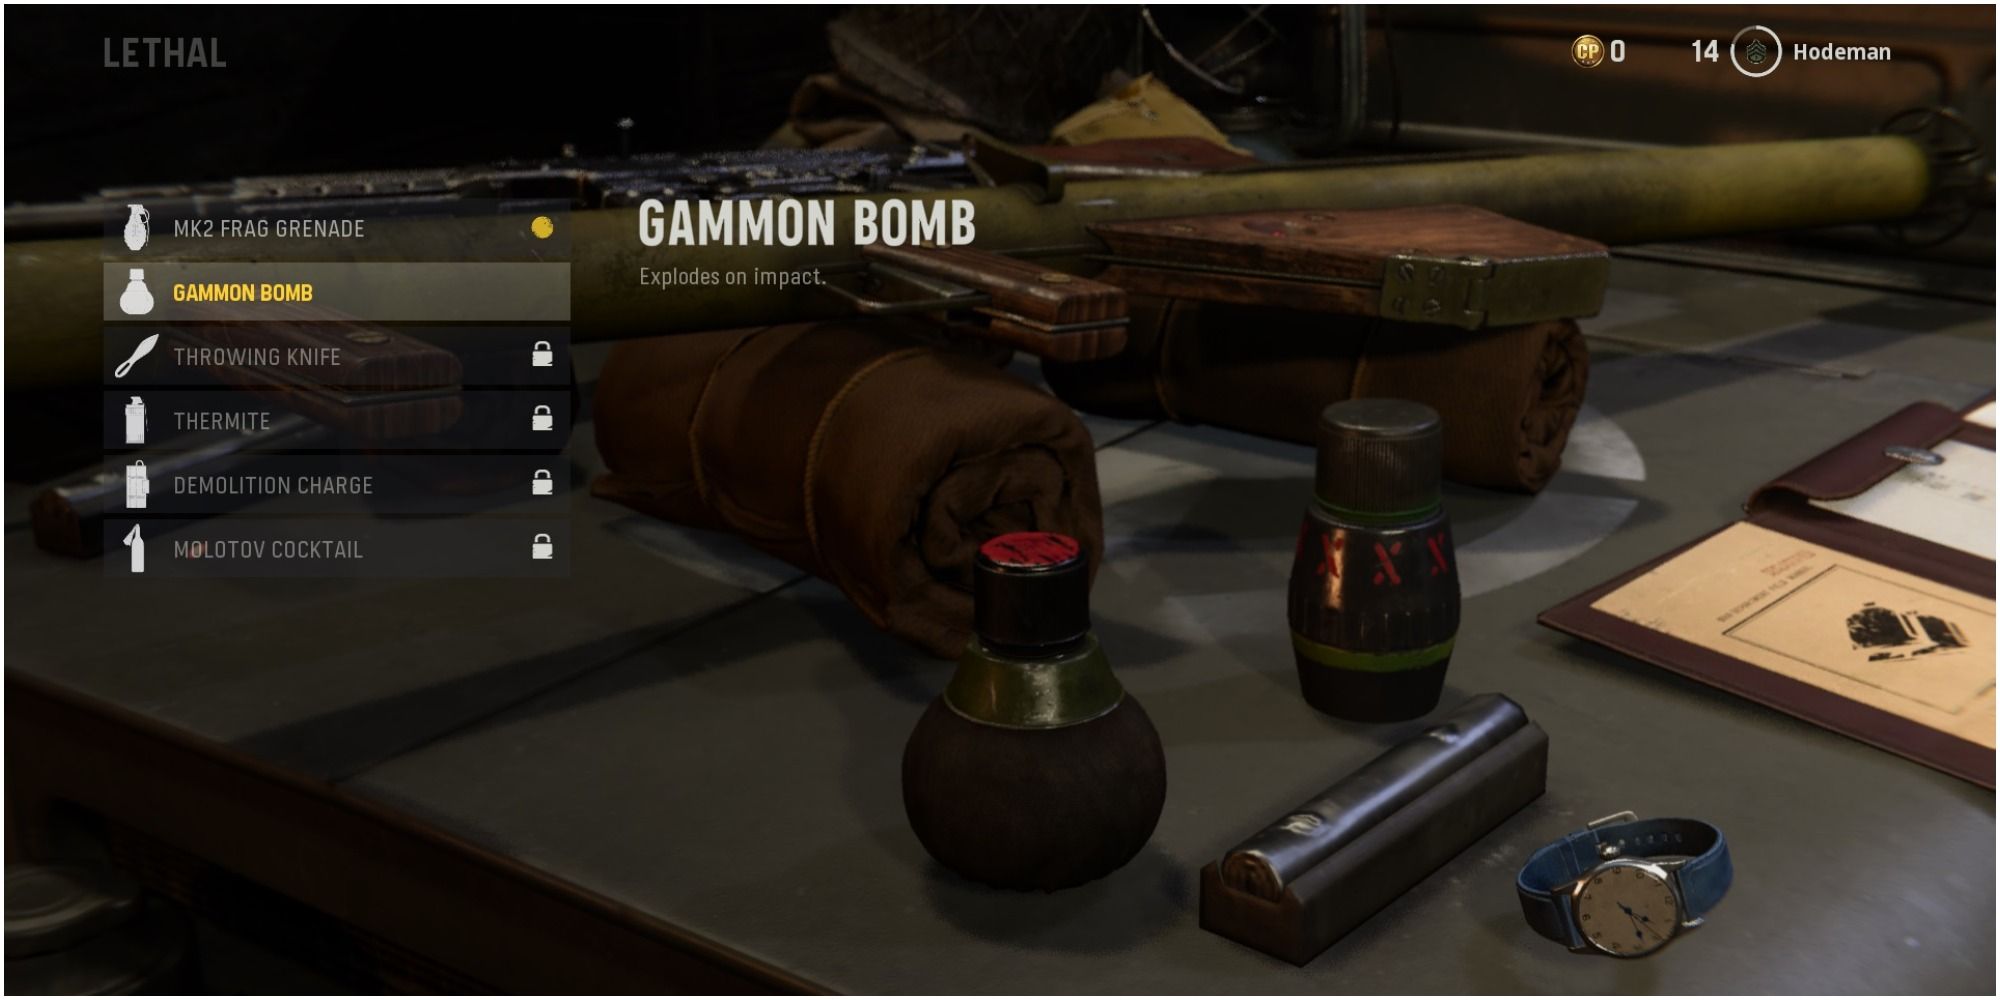 Call Of Duty Vanguard Description Of The Lethal Gammon Bomb